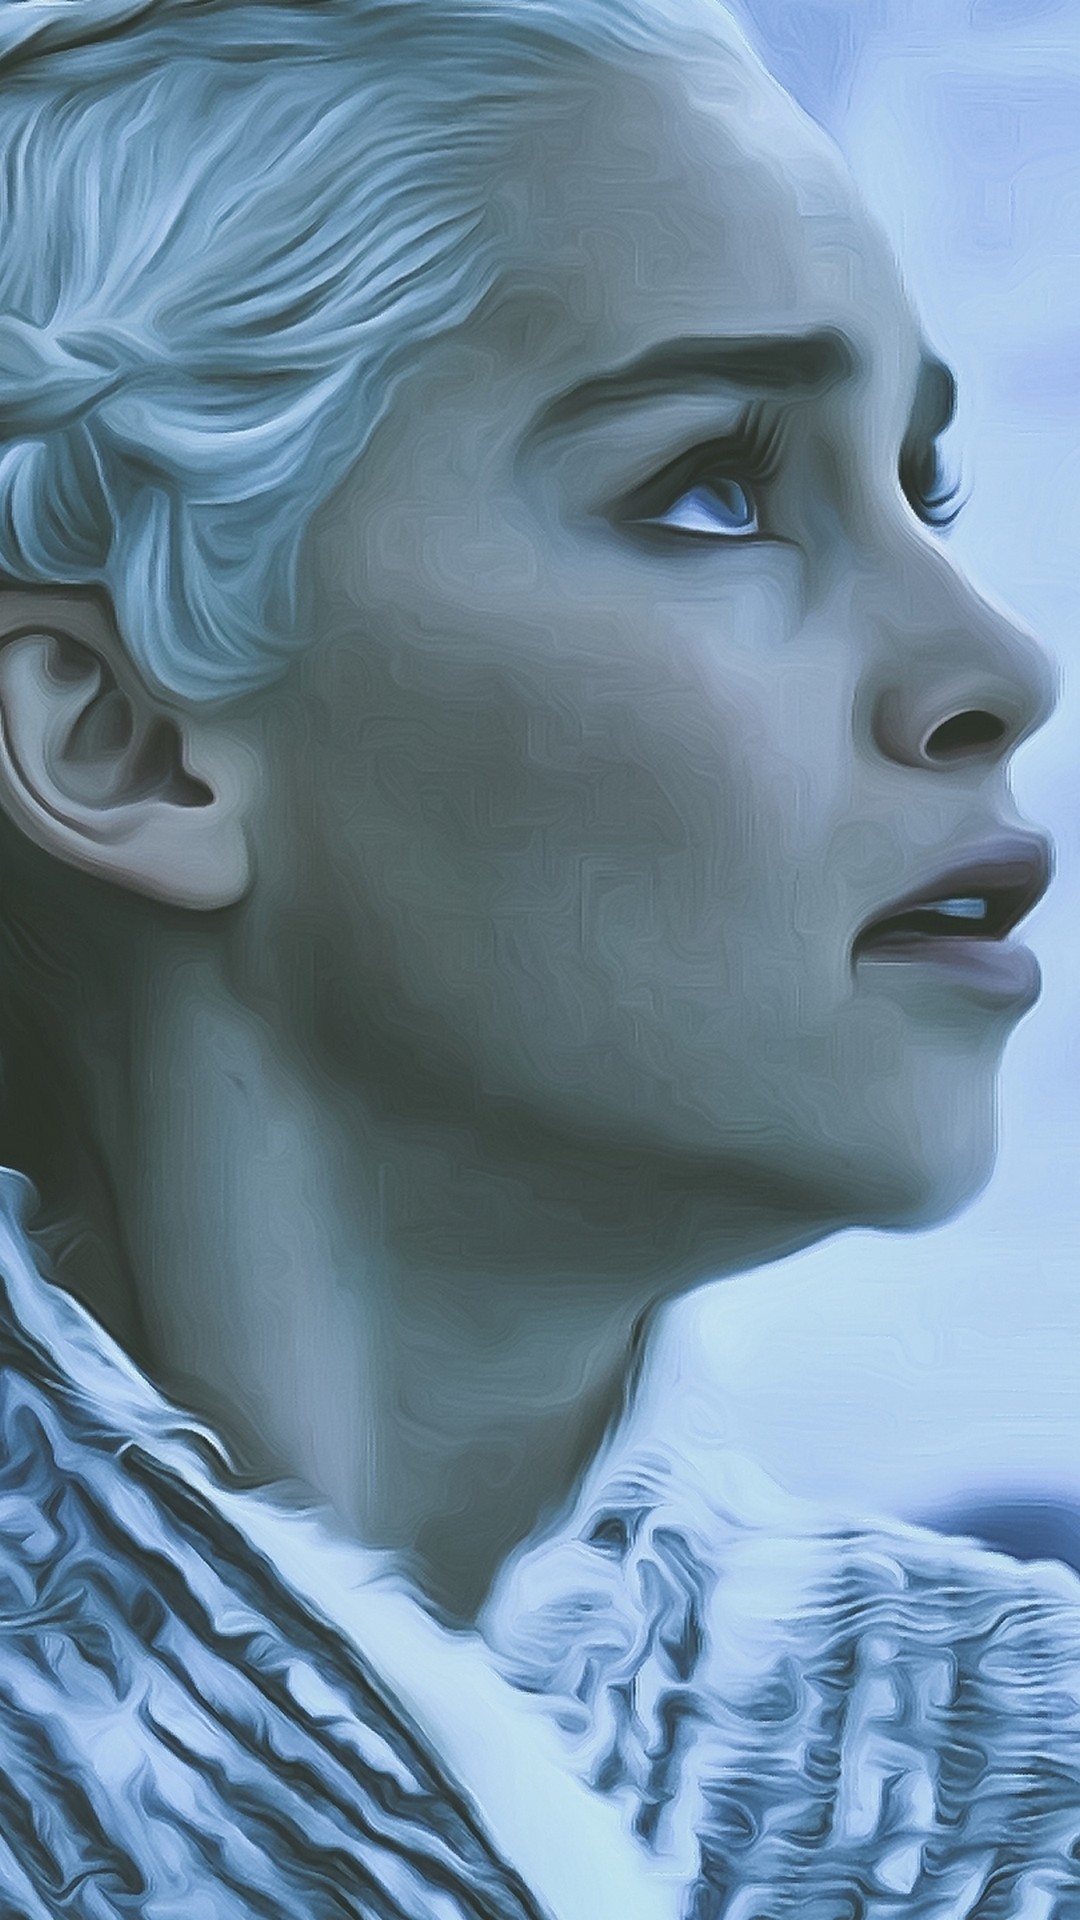 Game of Thrones 8 Season Android Wallpaper with high-resolution 1080x1920 pixel. You can use this wallpaper for your Android backgrounds, Tablet, Samsung Screensavers, Mobile Phone Lock Screen and another Smartphones device